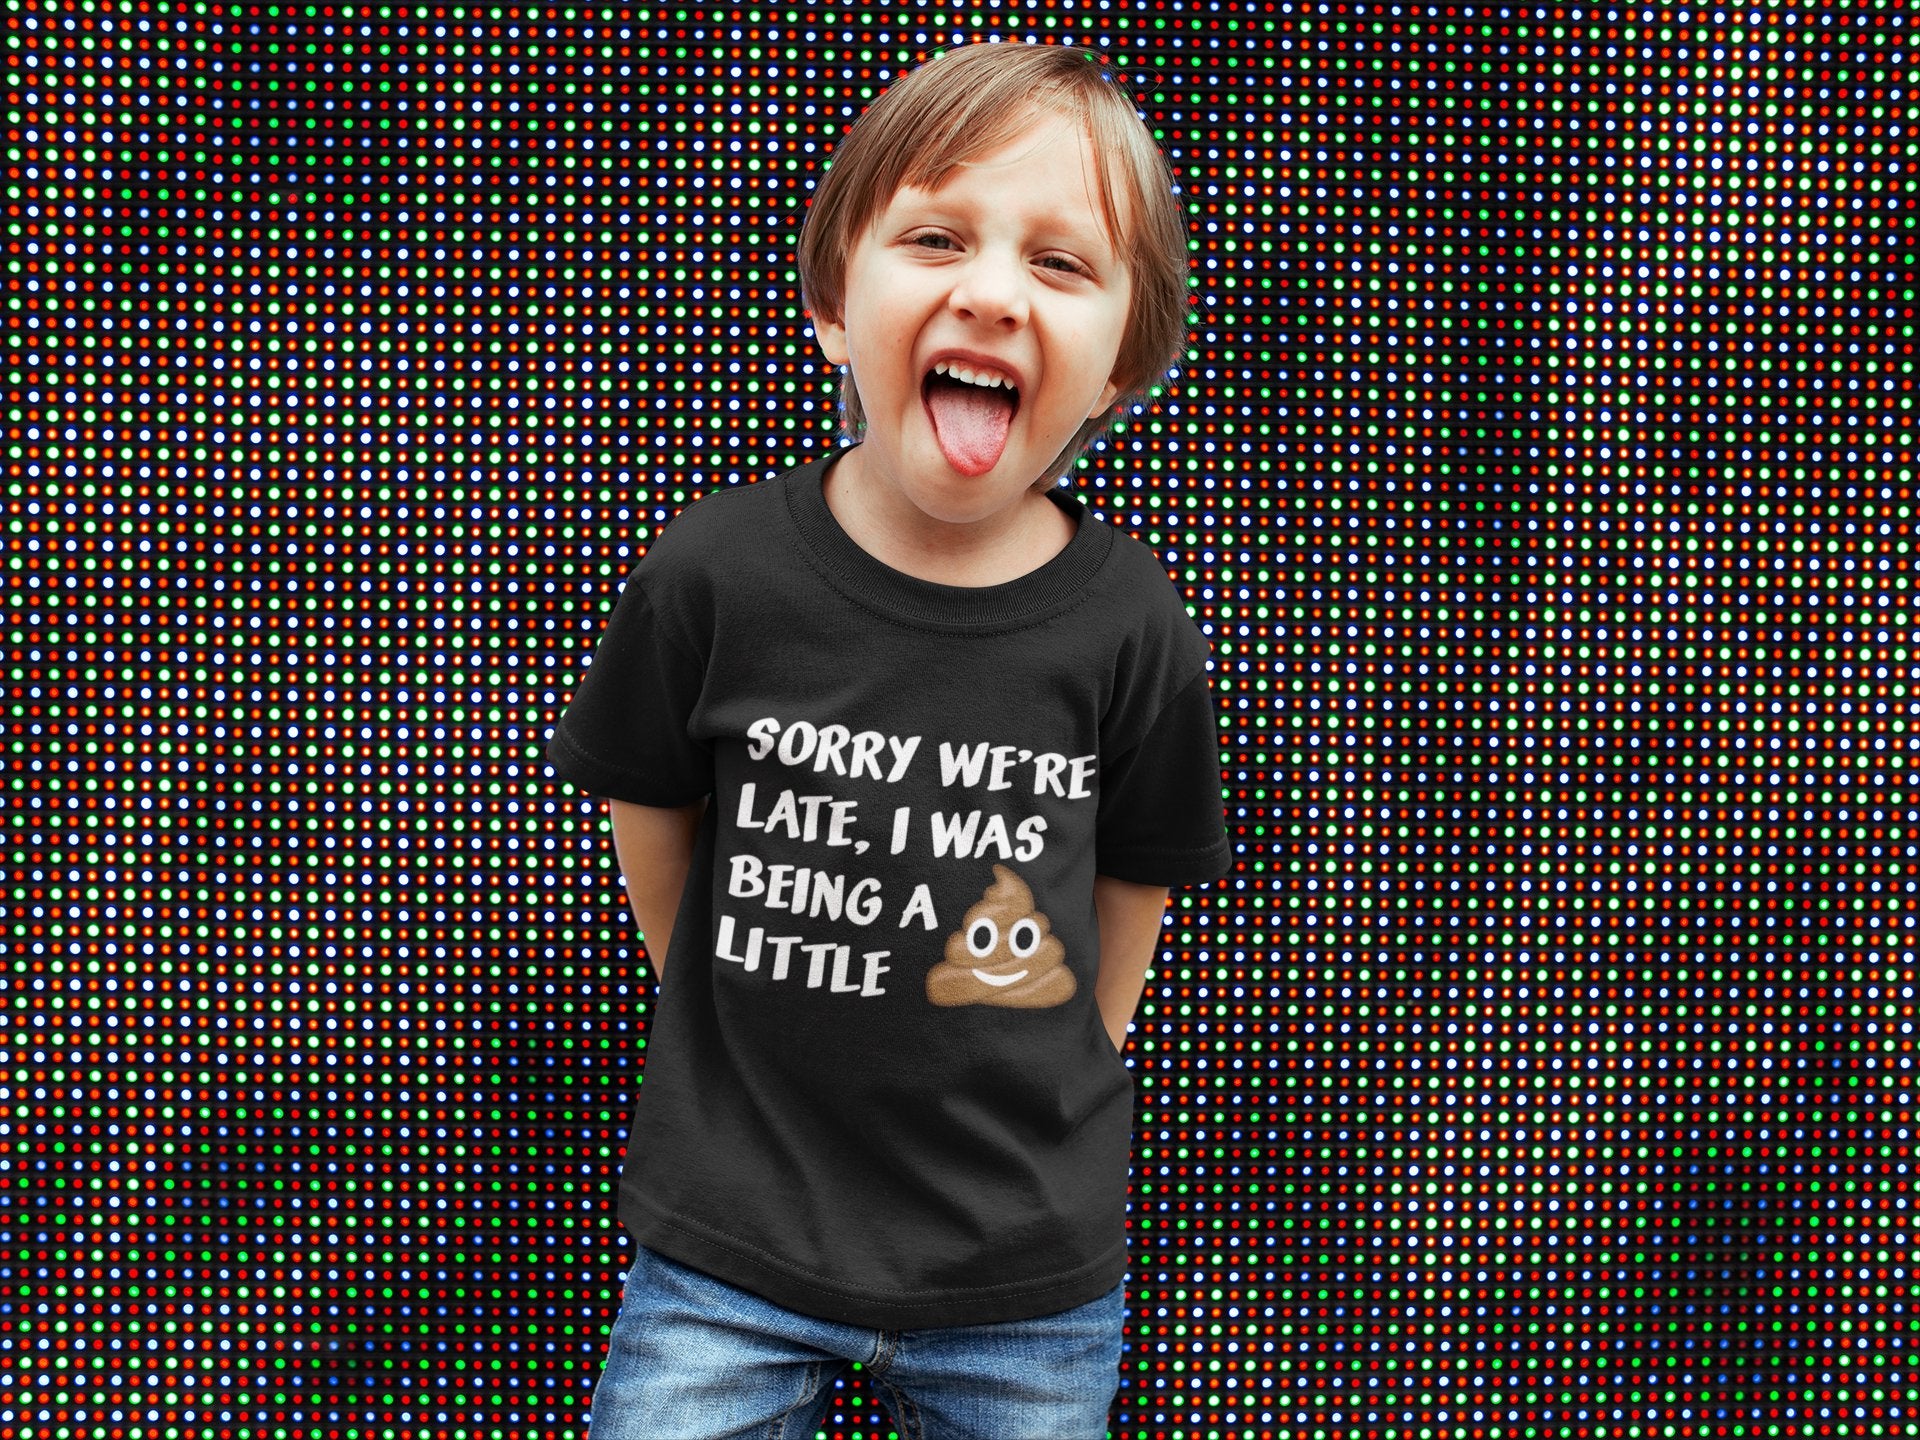 Sorry we're late, I was being a little "poop" T shirt - SBS T Shop